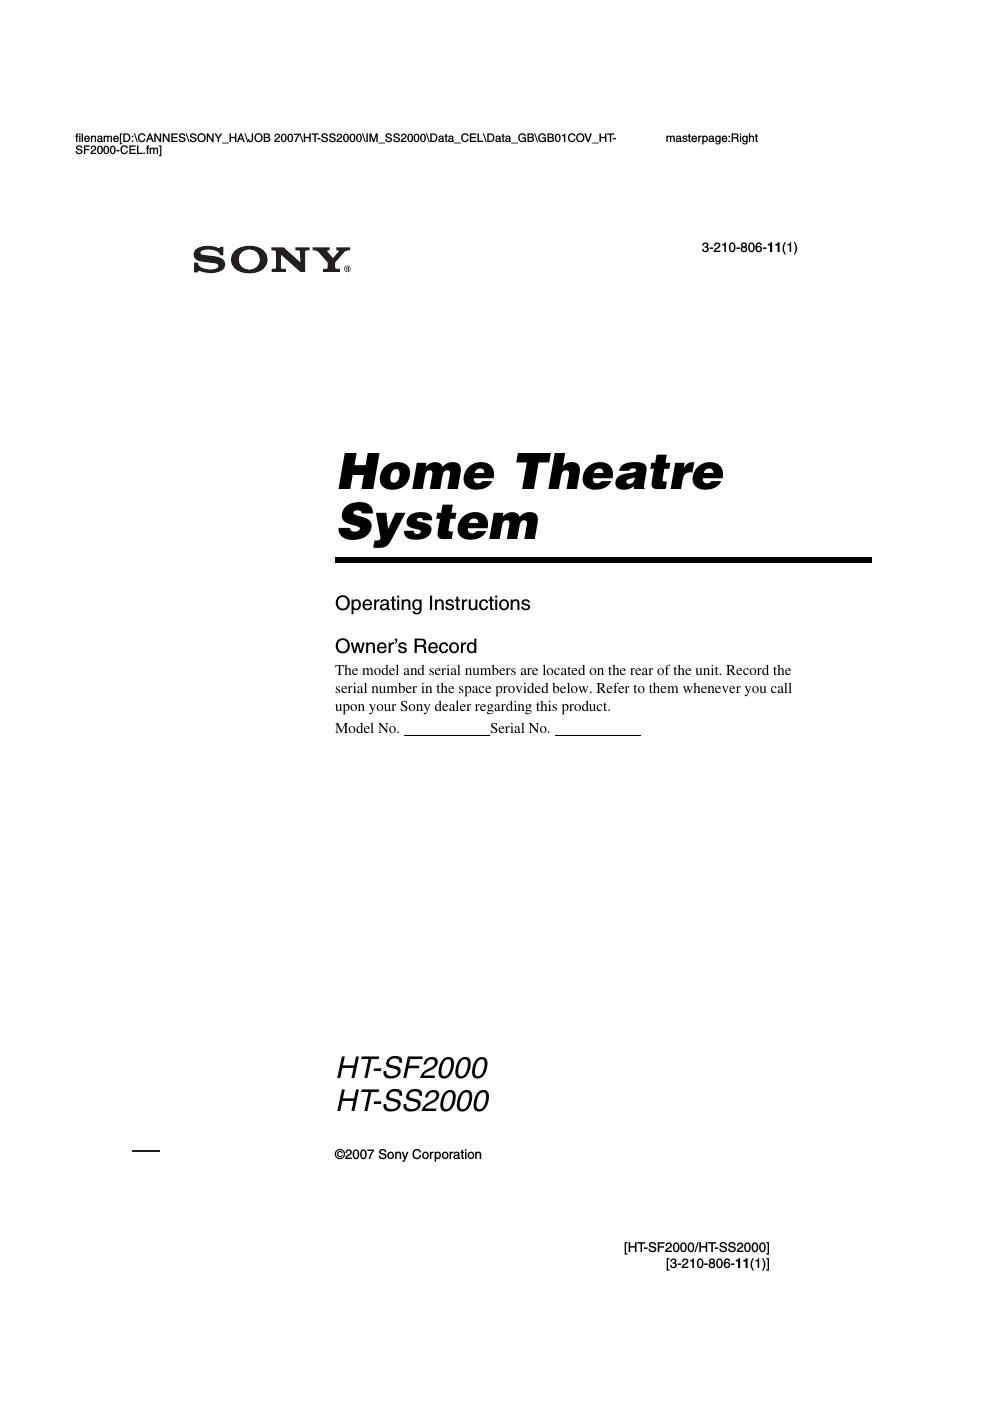 sony htsf 2000 owners manual